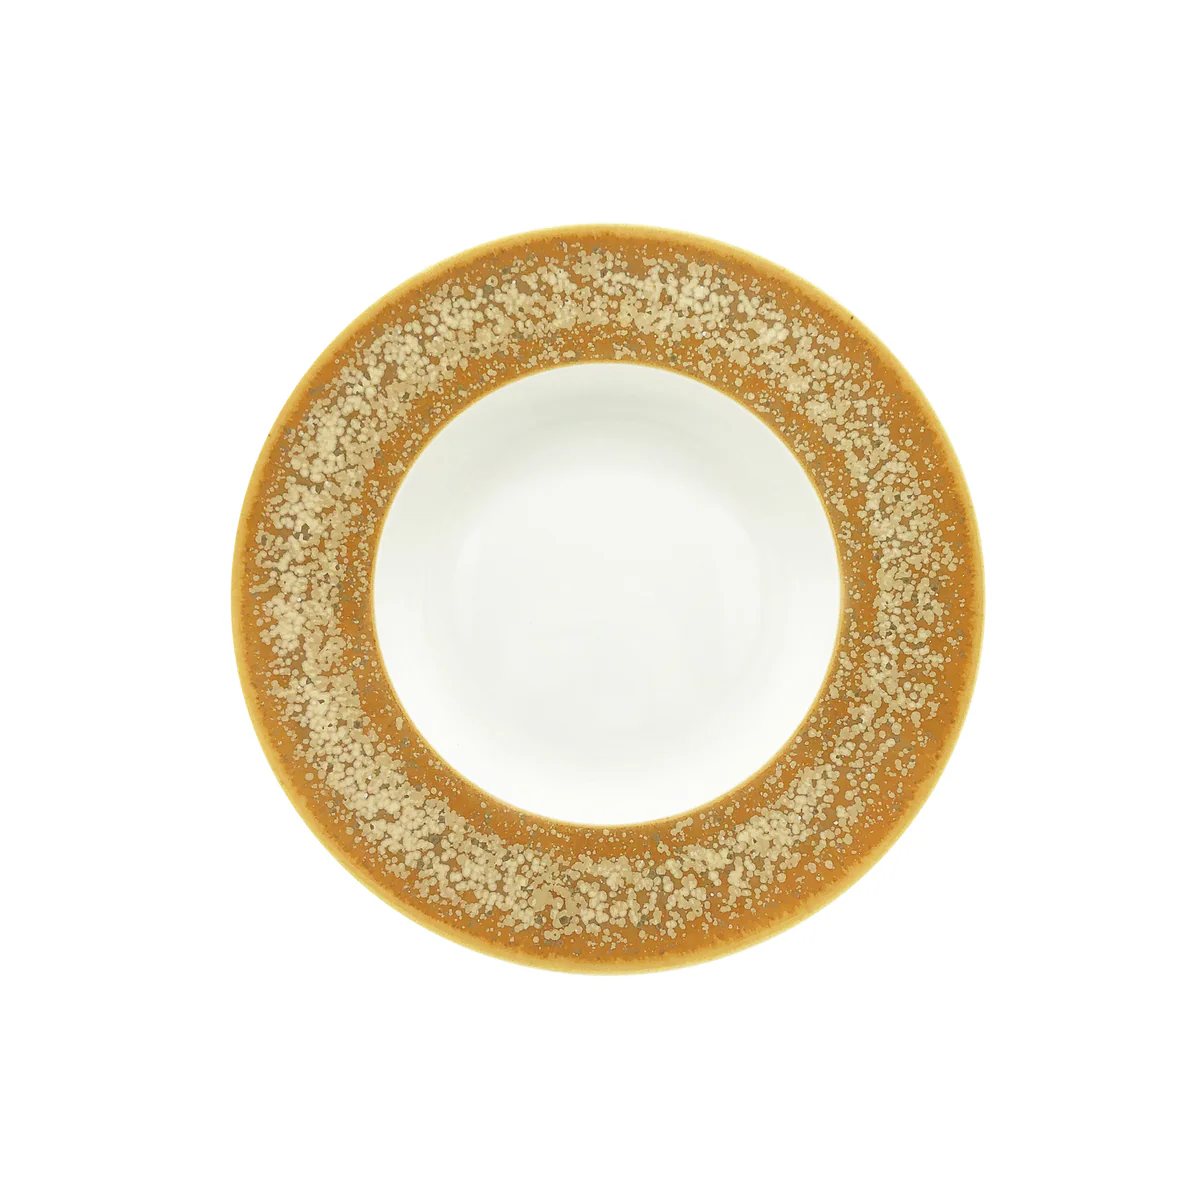 SONG Ocre - Rim soup plate MM, 2011